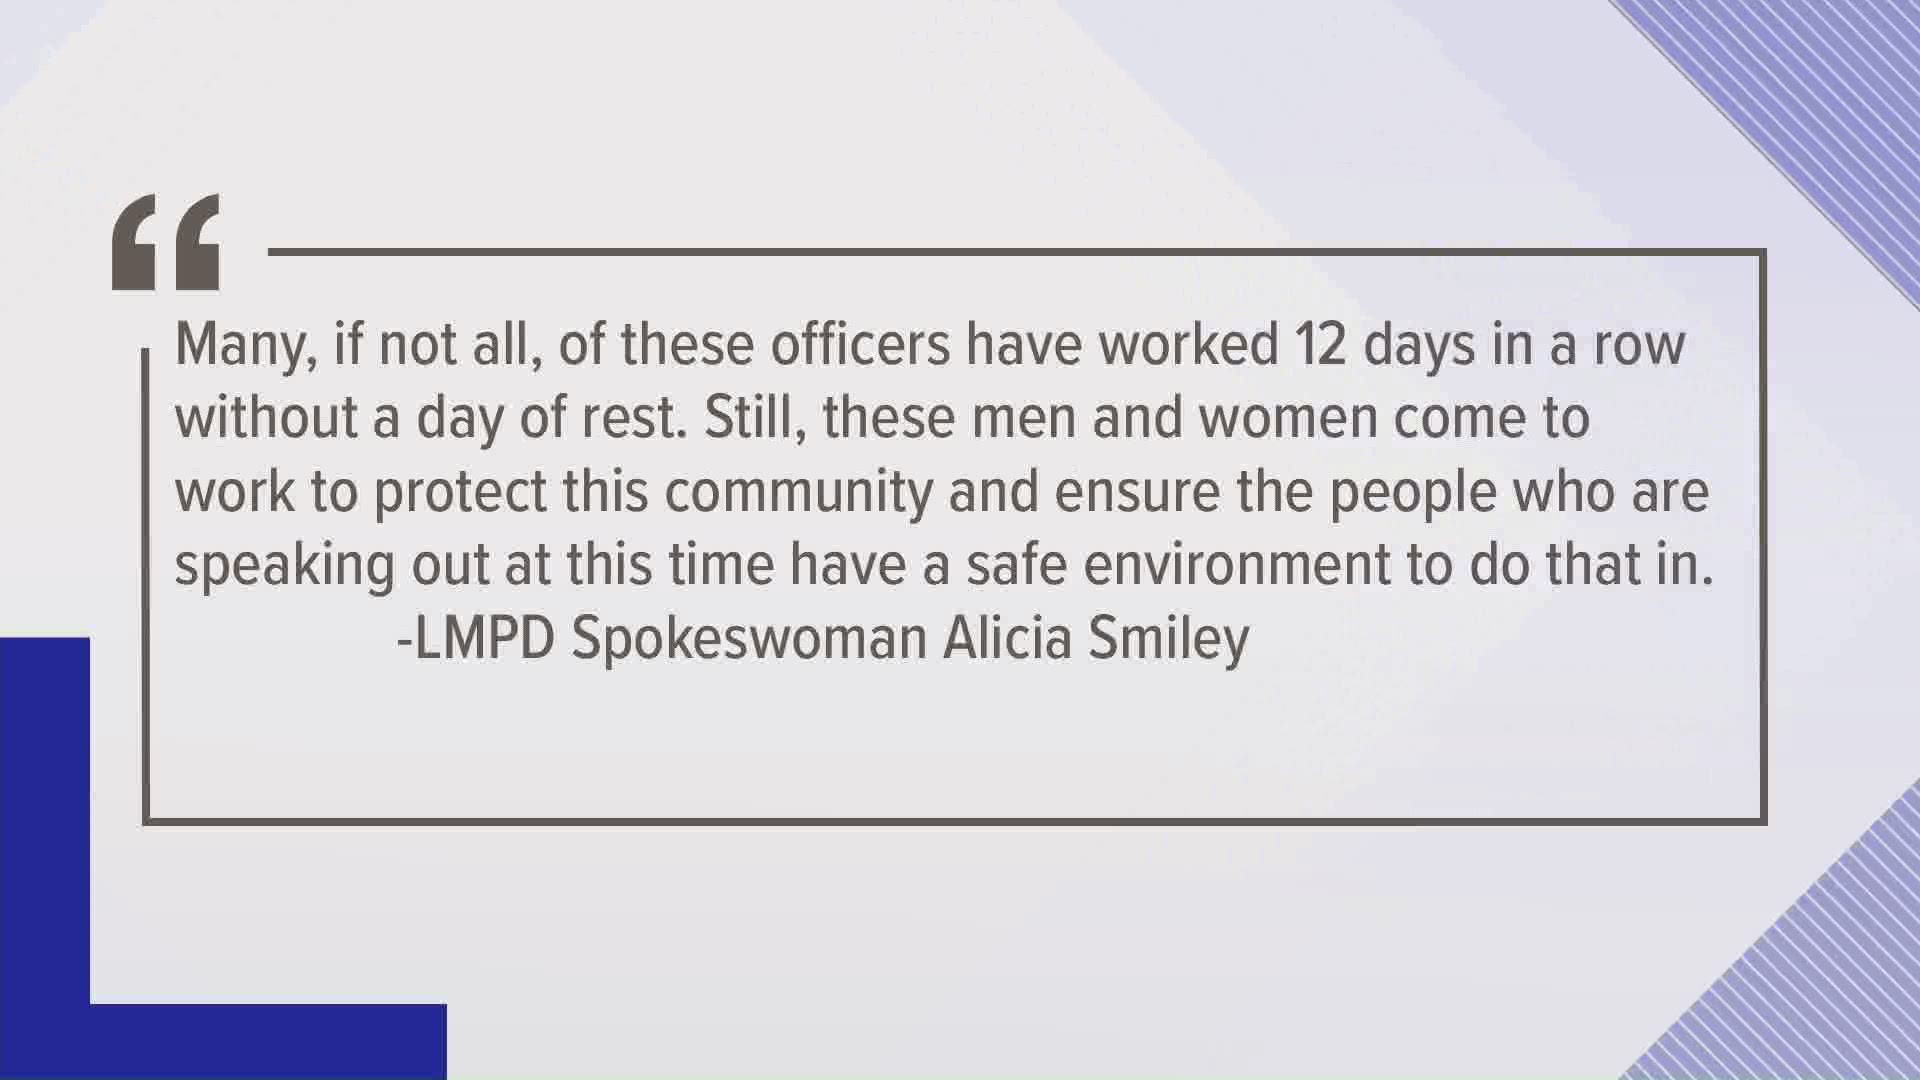 After rumors surfaced that Louisville Metro Police officers were leaving the force due to recent protests in the city, the department is addressing those rumors.